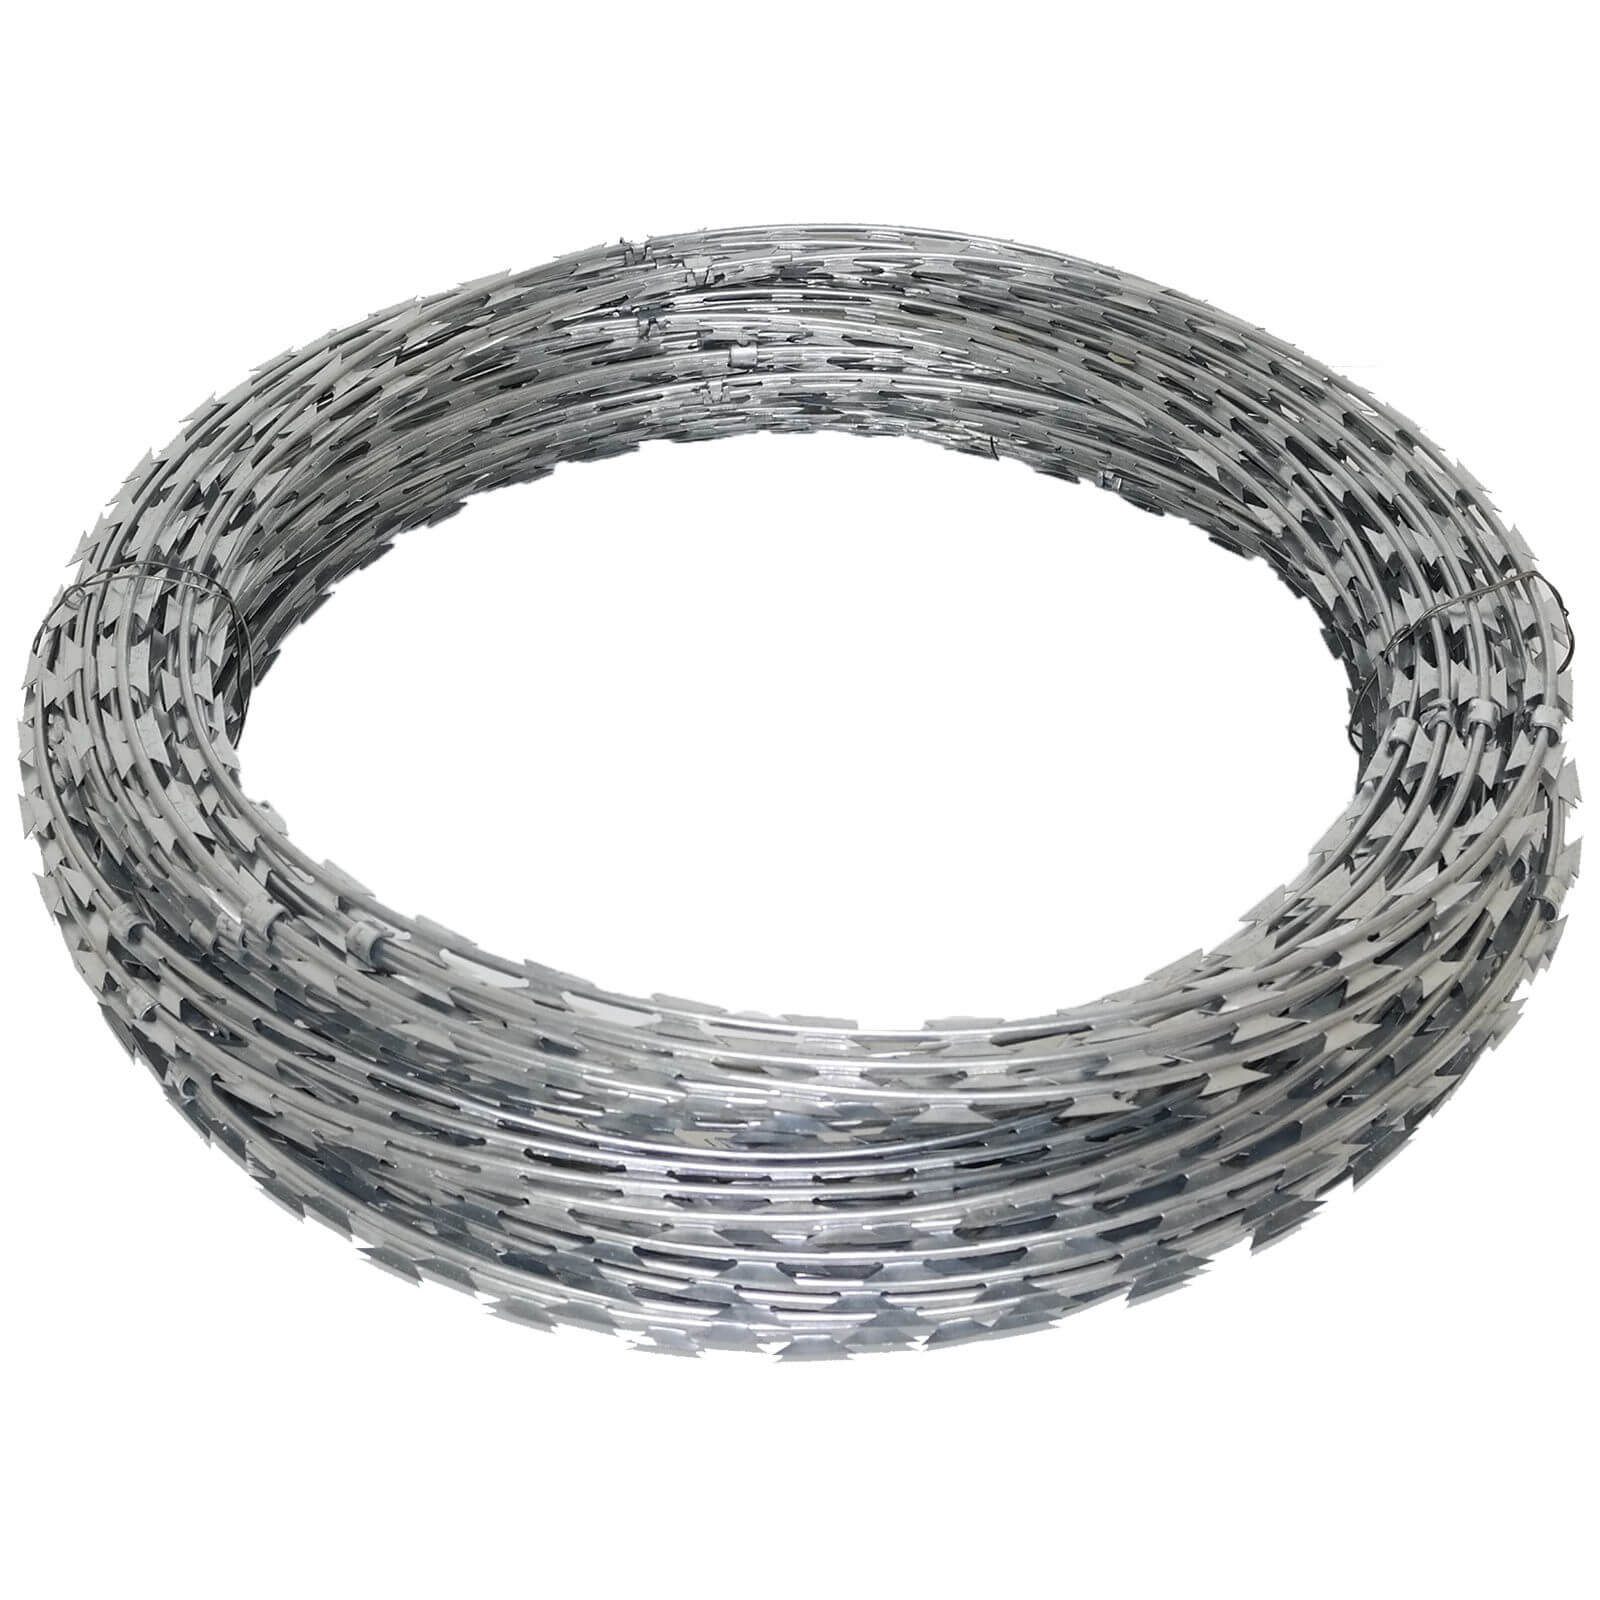 Razor wire - the ultimate security system